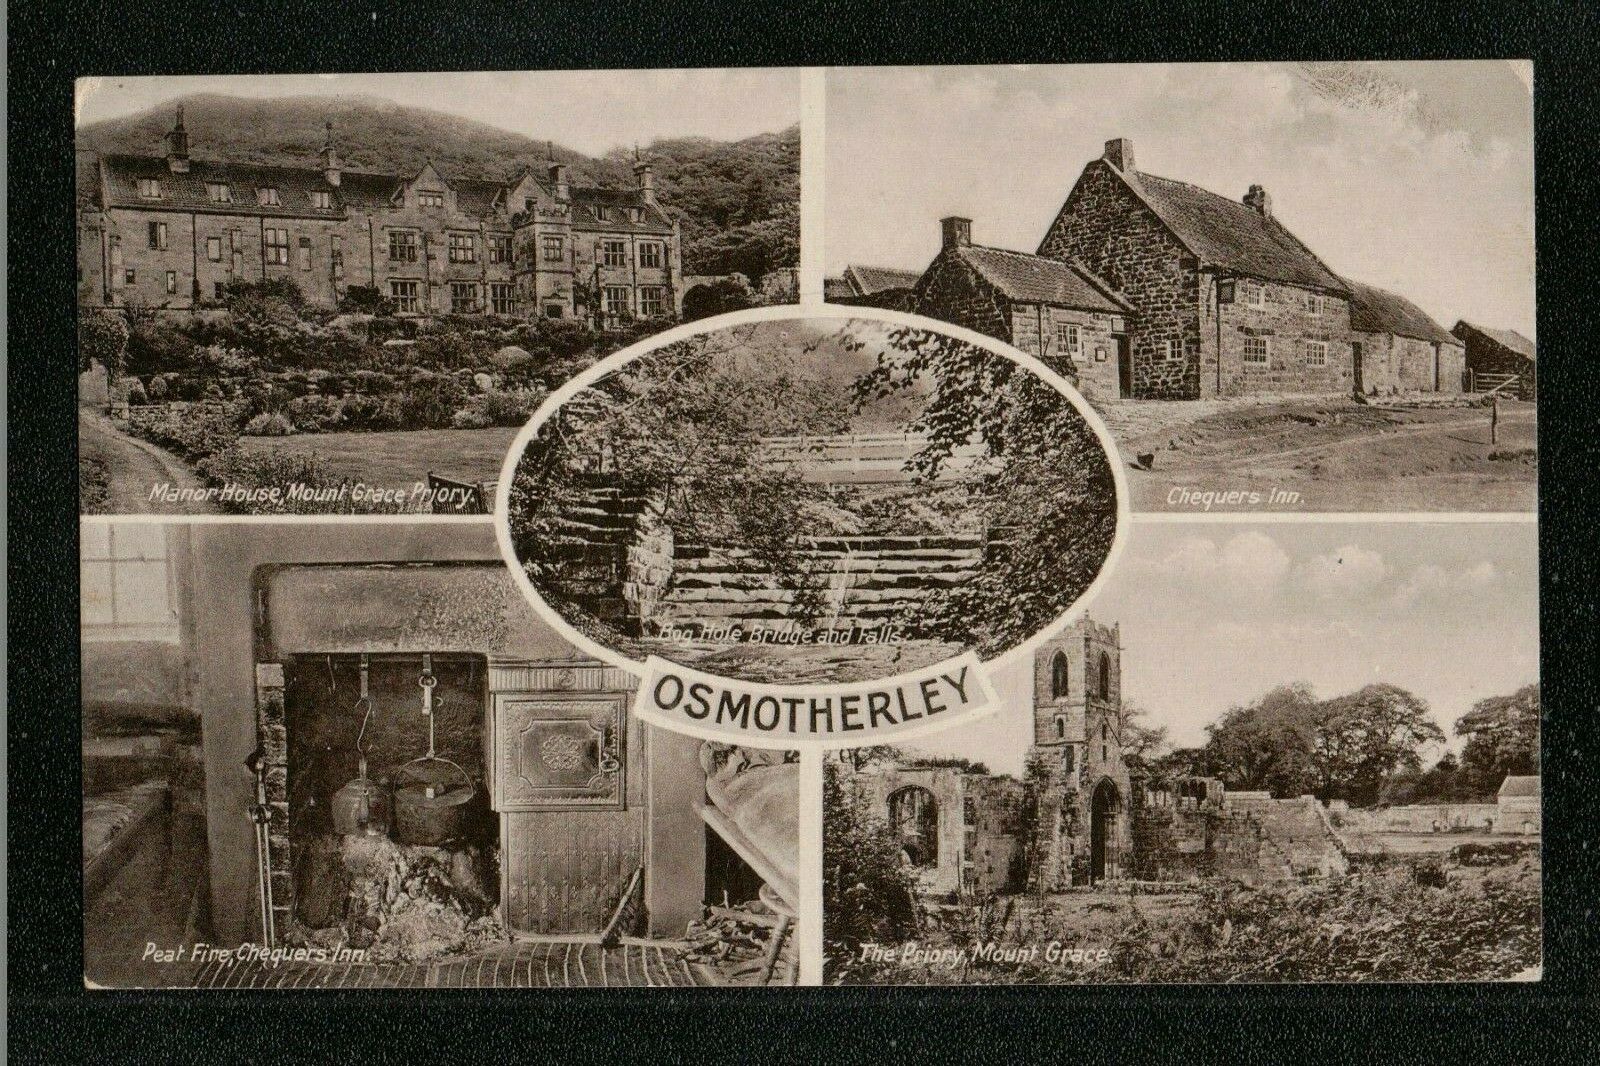 House Clearance - Mount Grace Priory ~ Chequers Inn ~ OSMOTHERLEY 1950's ? Service ~ Nr Yarm